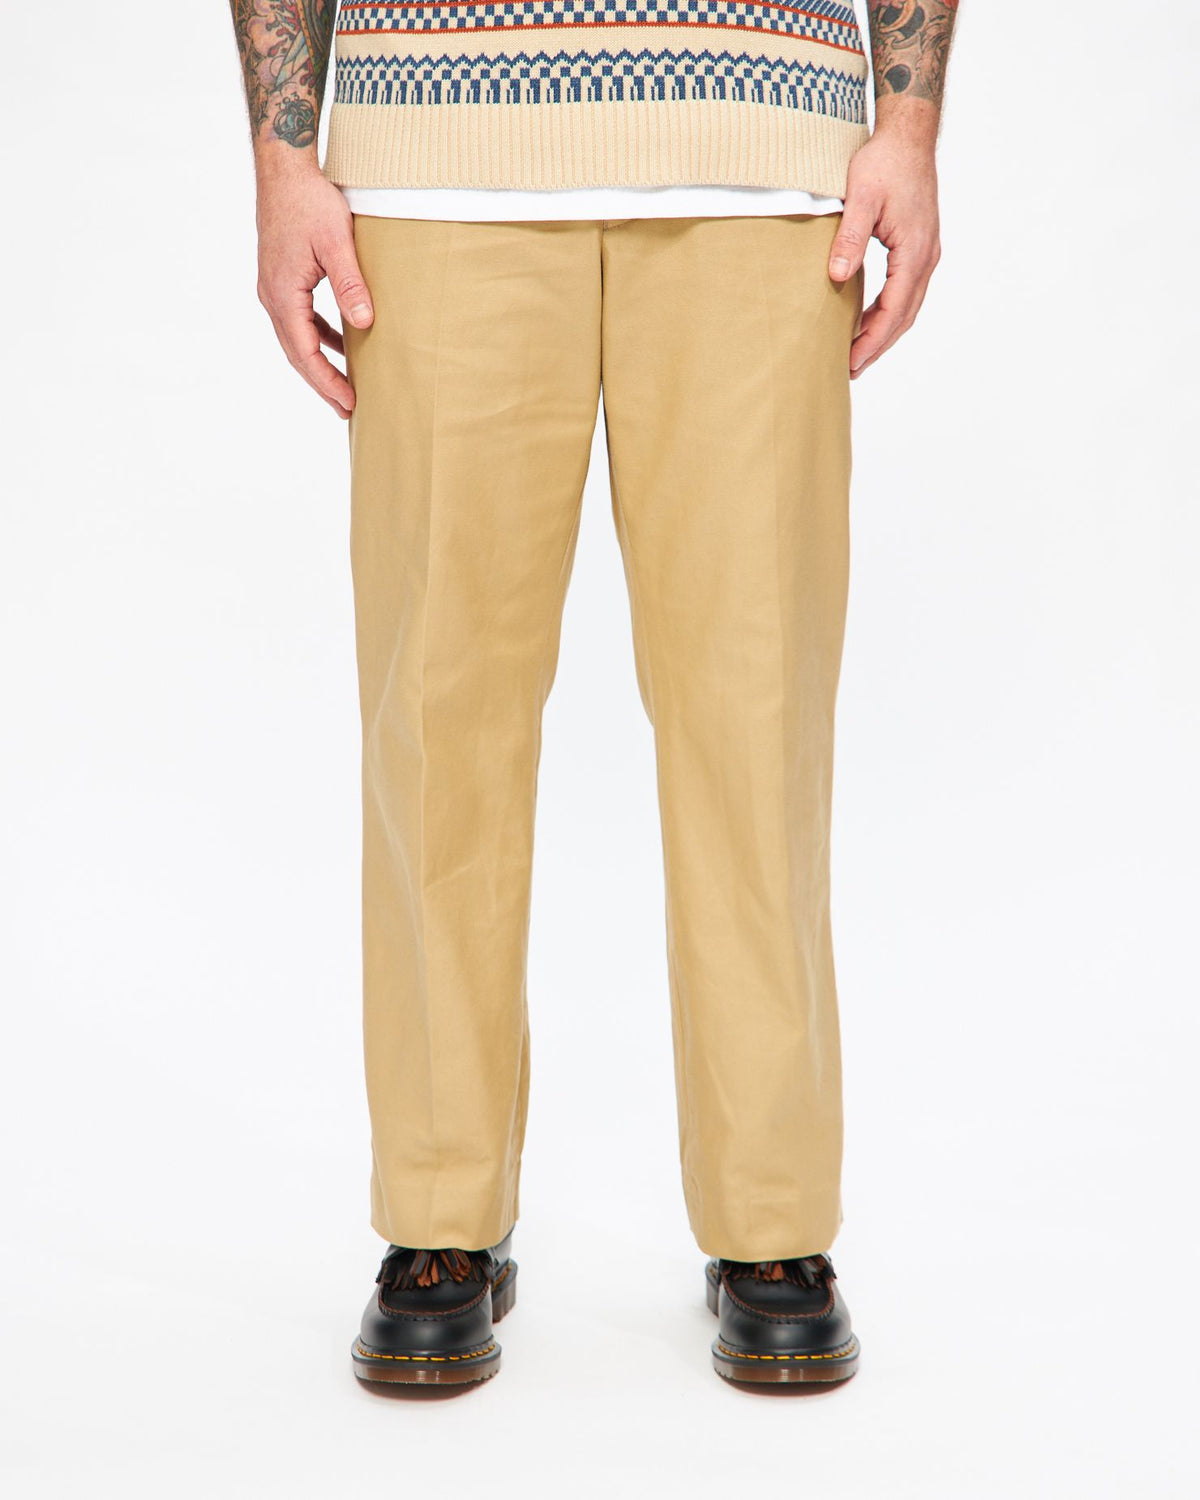 Mobley Straight Pant in Khaki